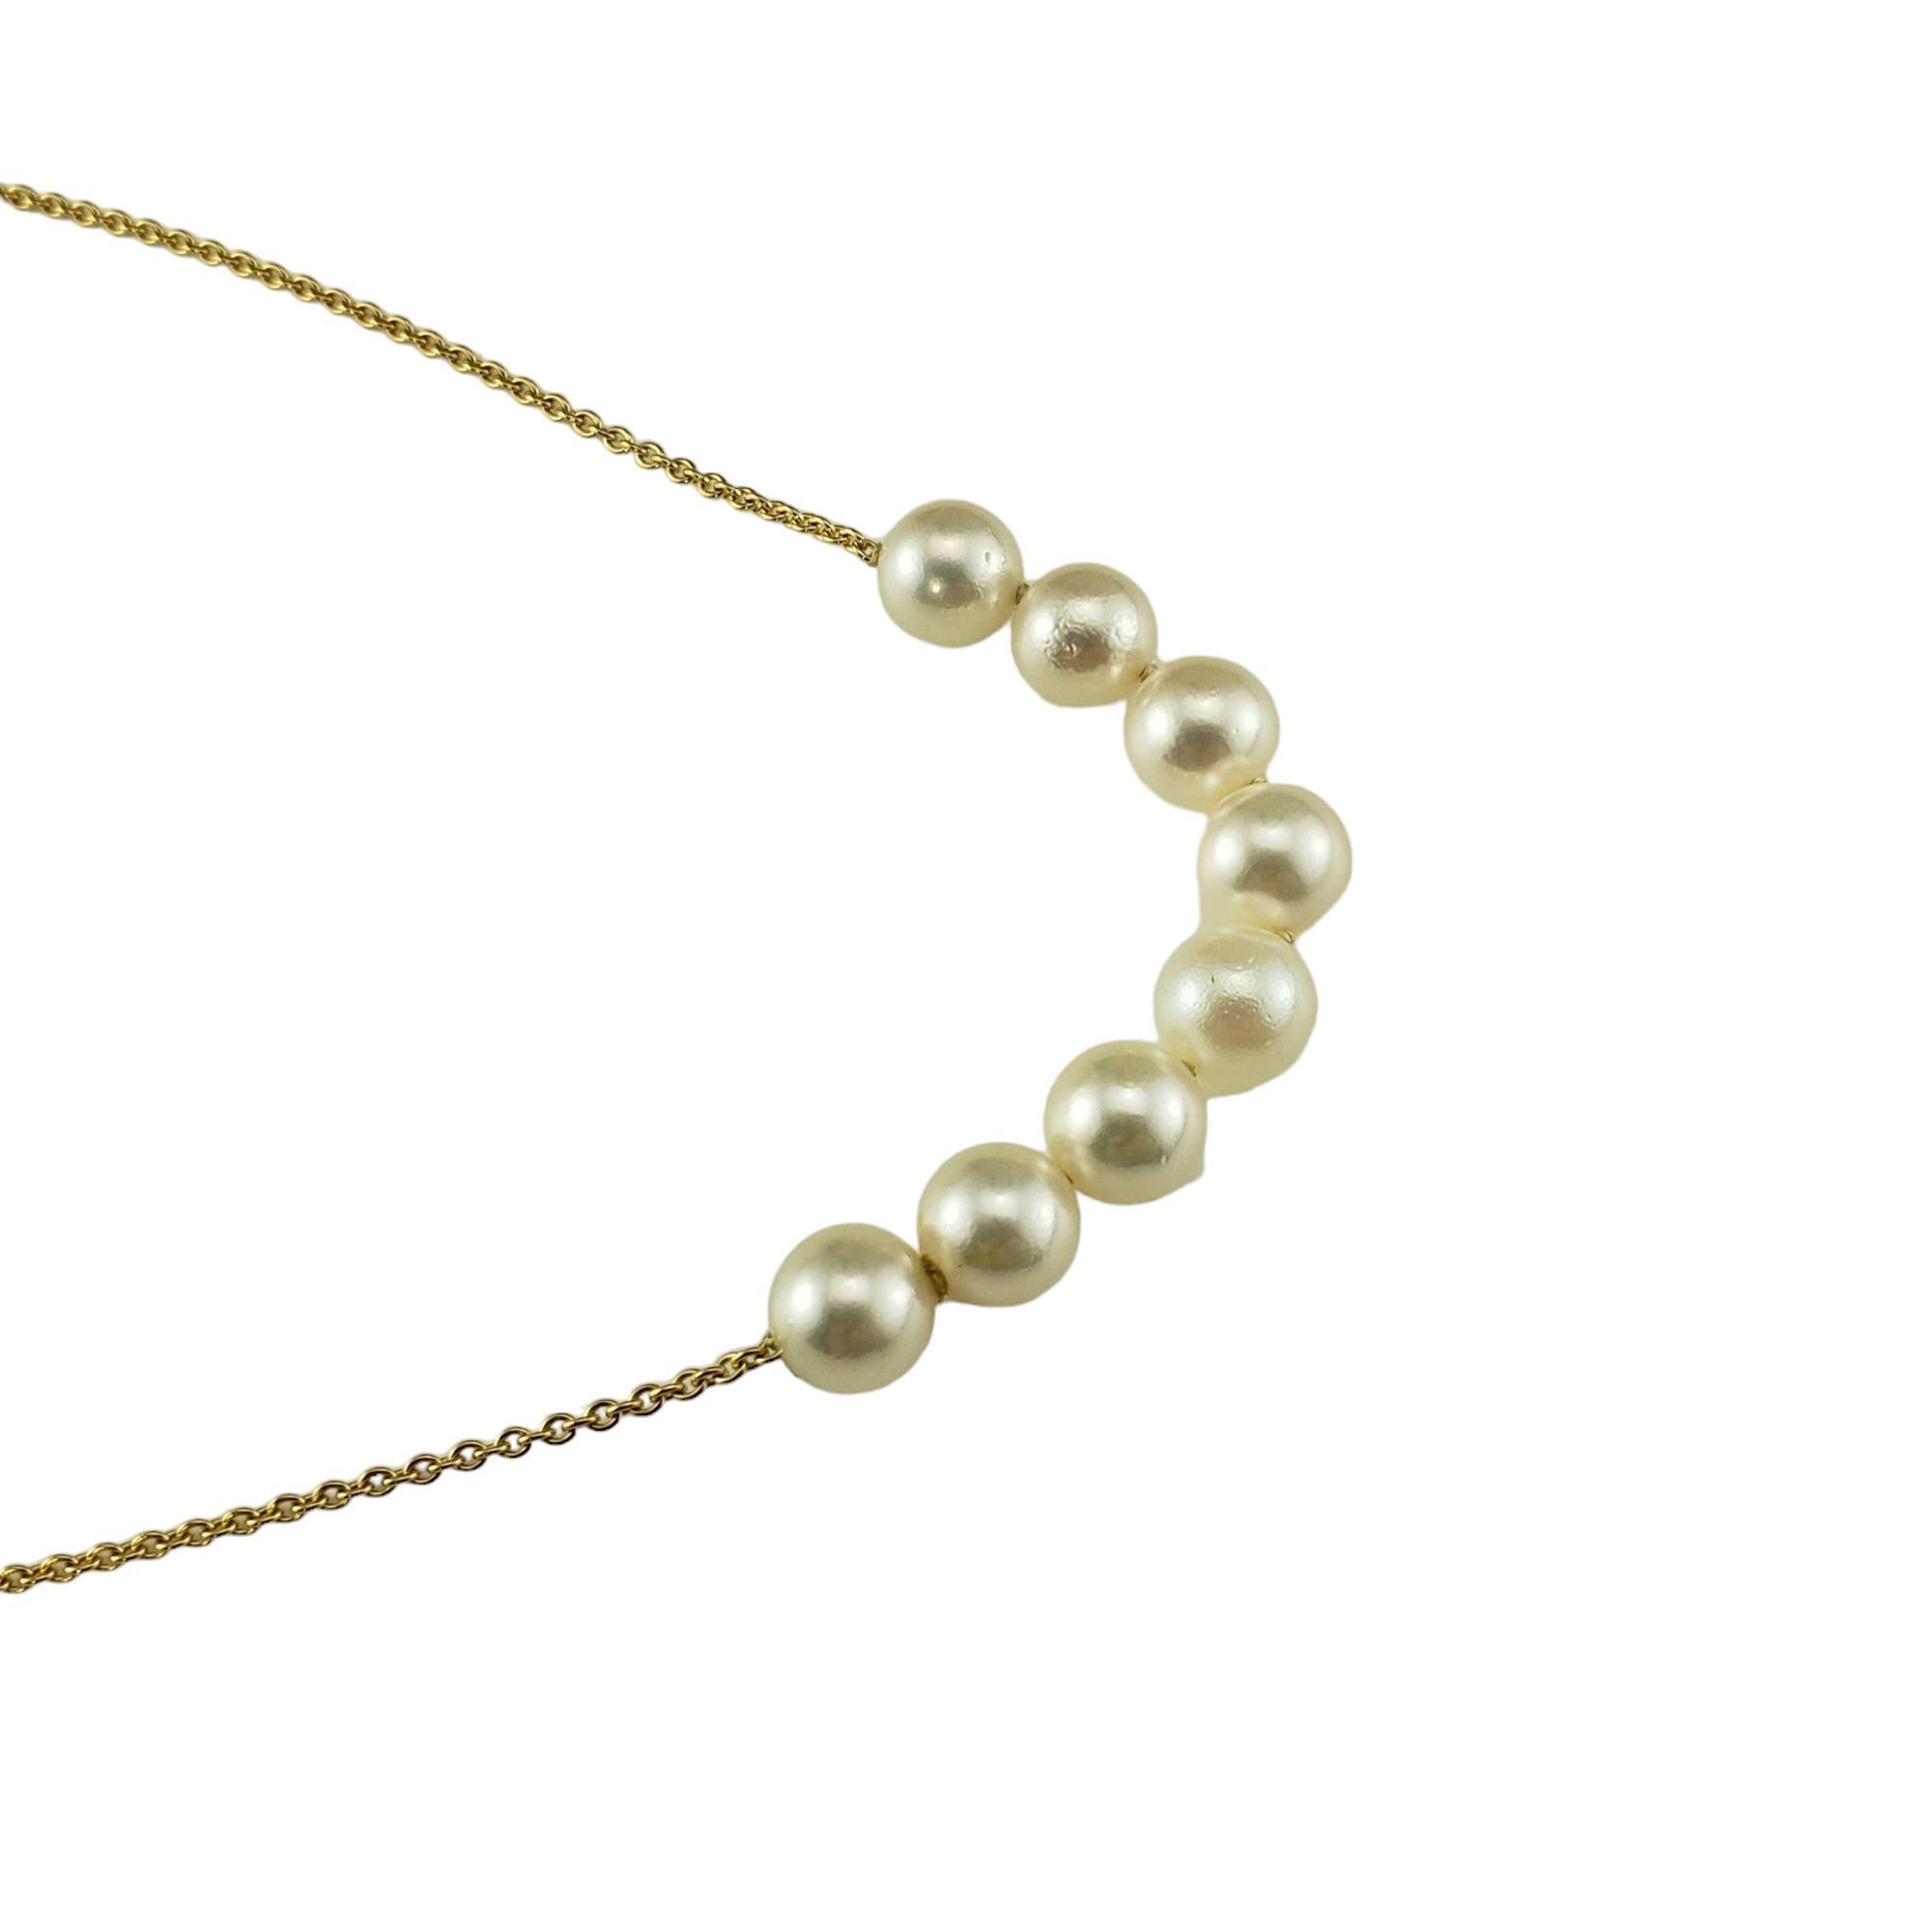 Women's 14 Karat Yellow Gold and Pearl Necklace #17093 For Sale